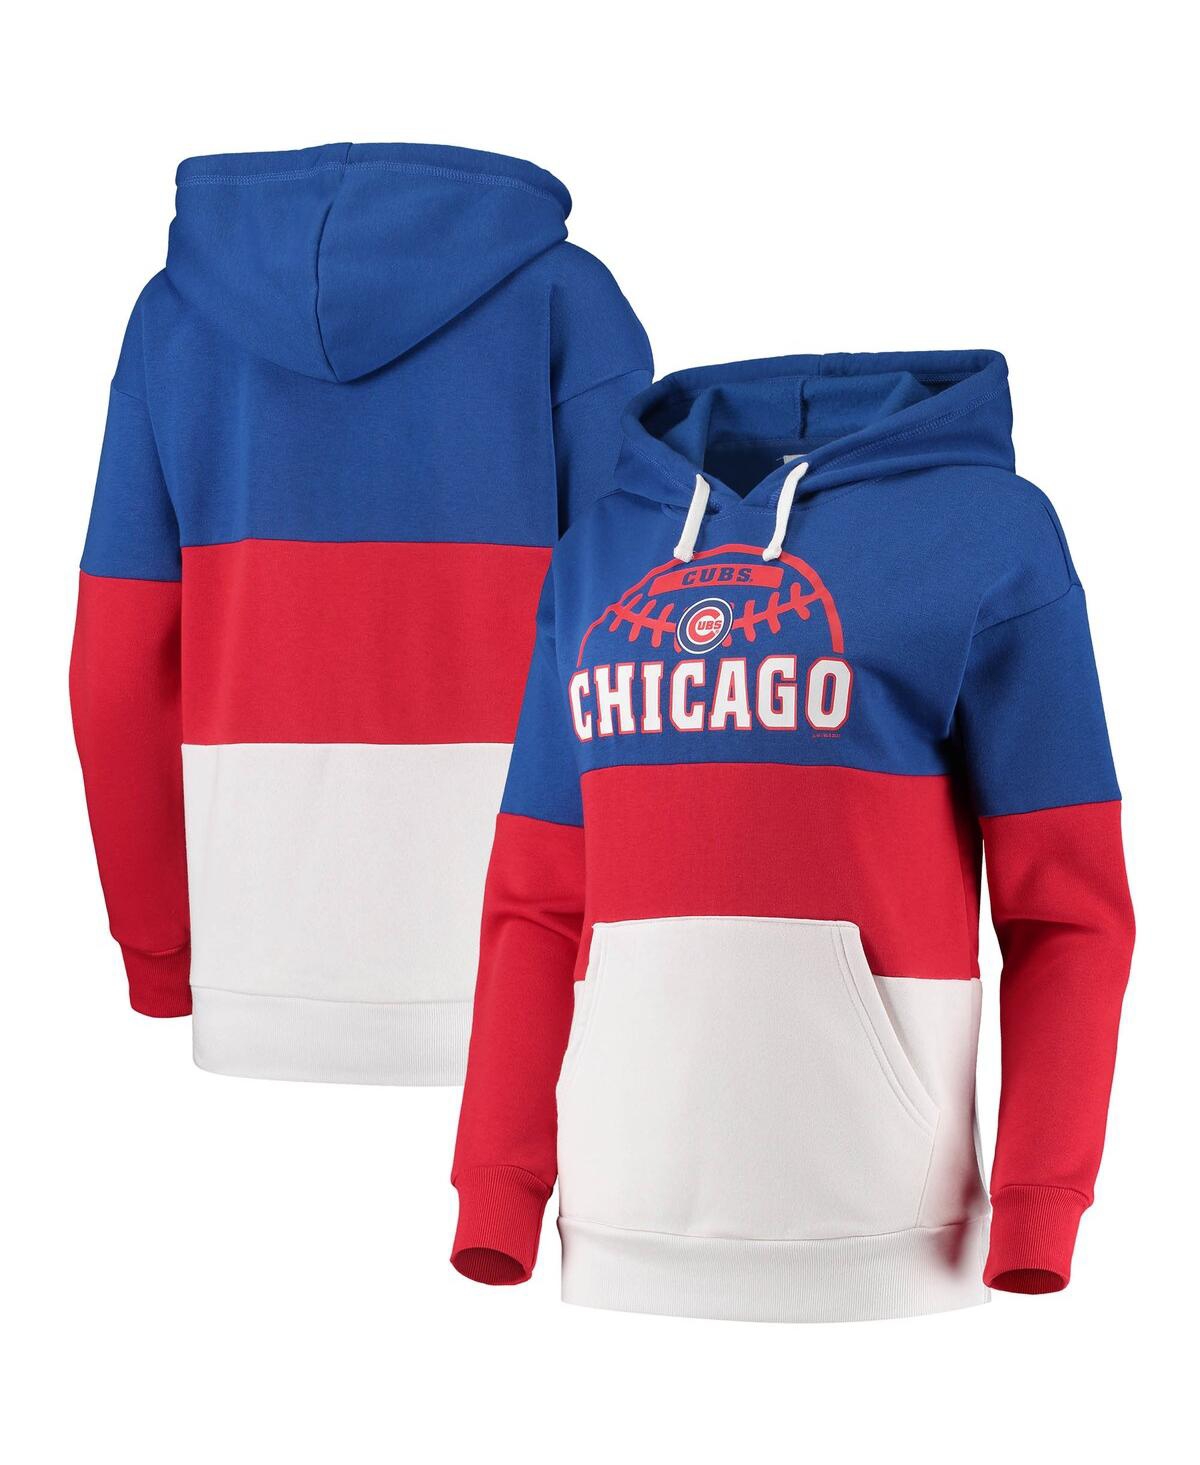 Women's G-iii Sports by Carl Banks Royal, Red Chicago Cubs Block and Tackle Colorblock Pullover Hoodie - Royal, Red